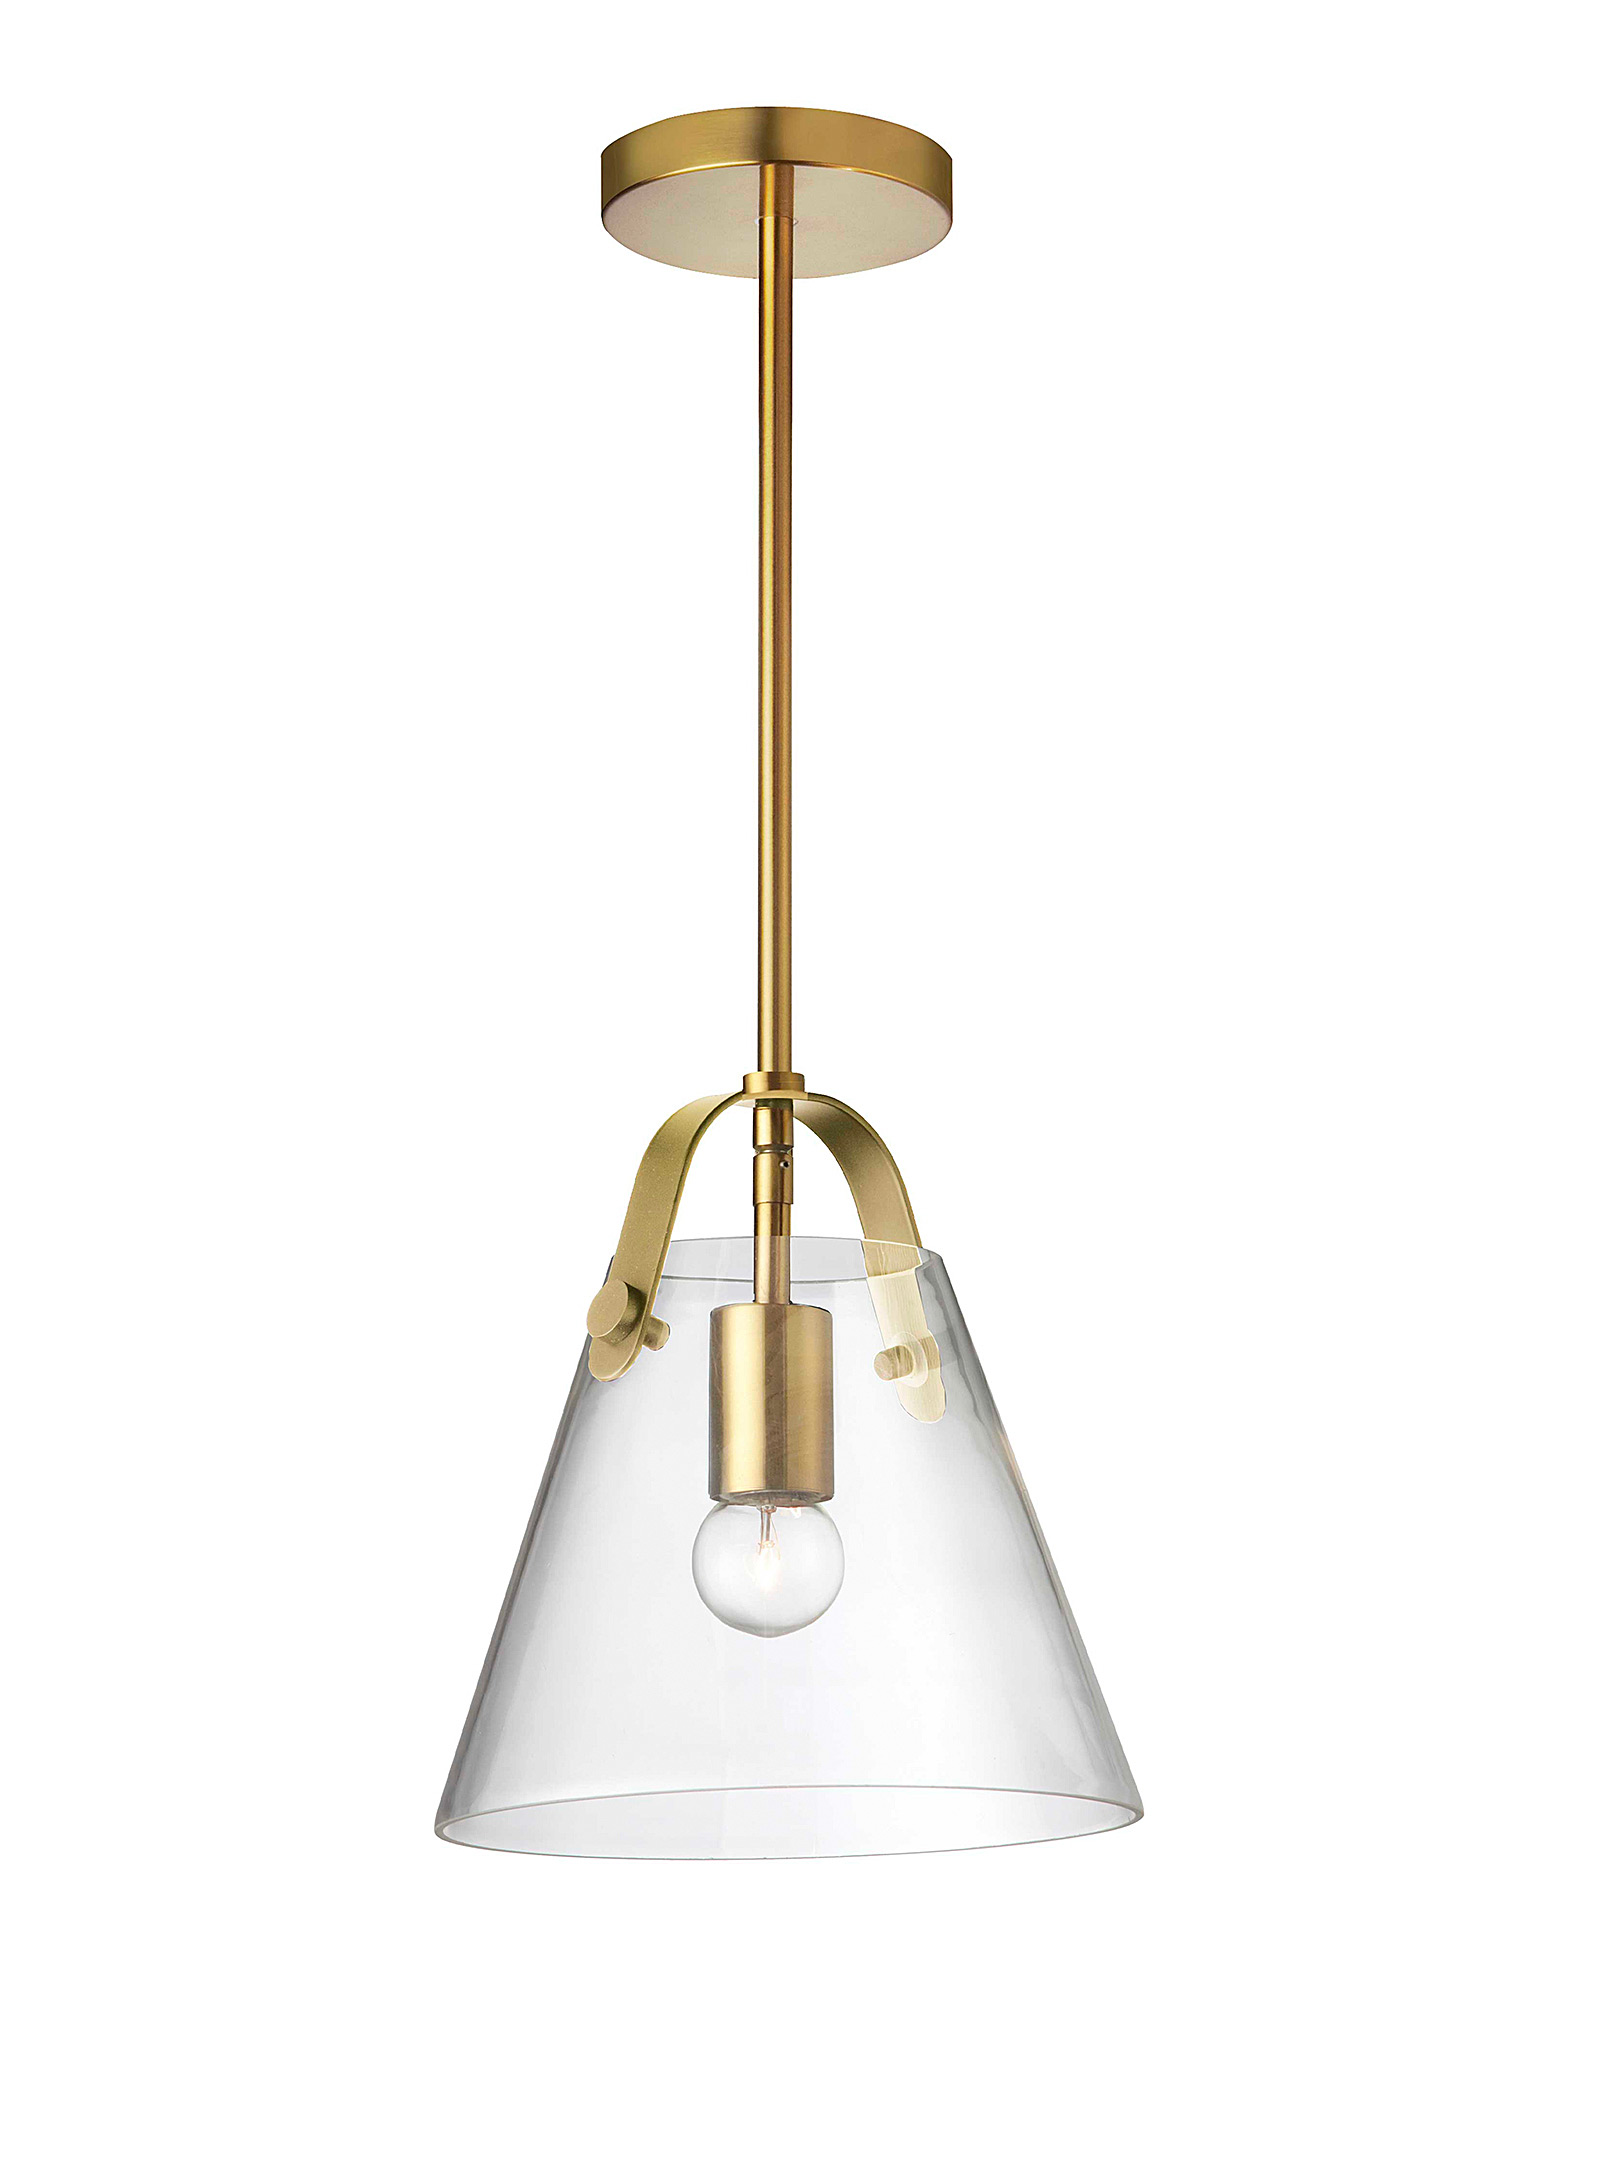 Simons Maison Small Crystalline Brass Hanging Lamp In Assorted